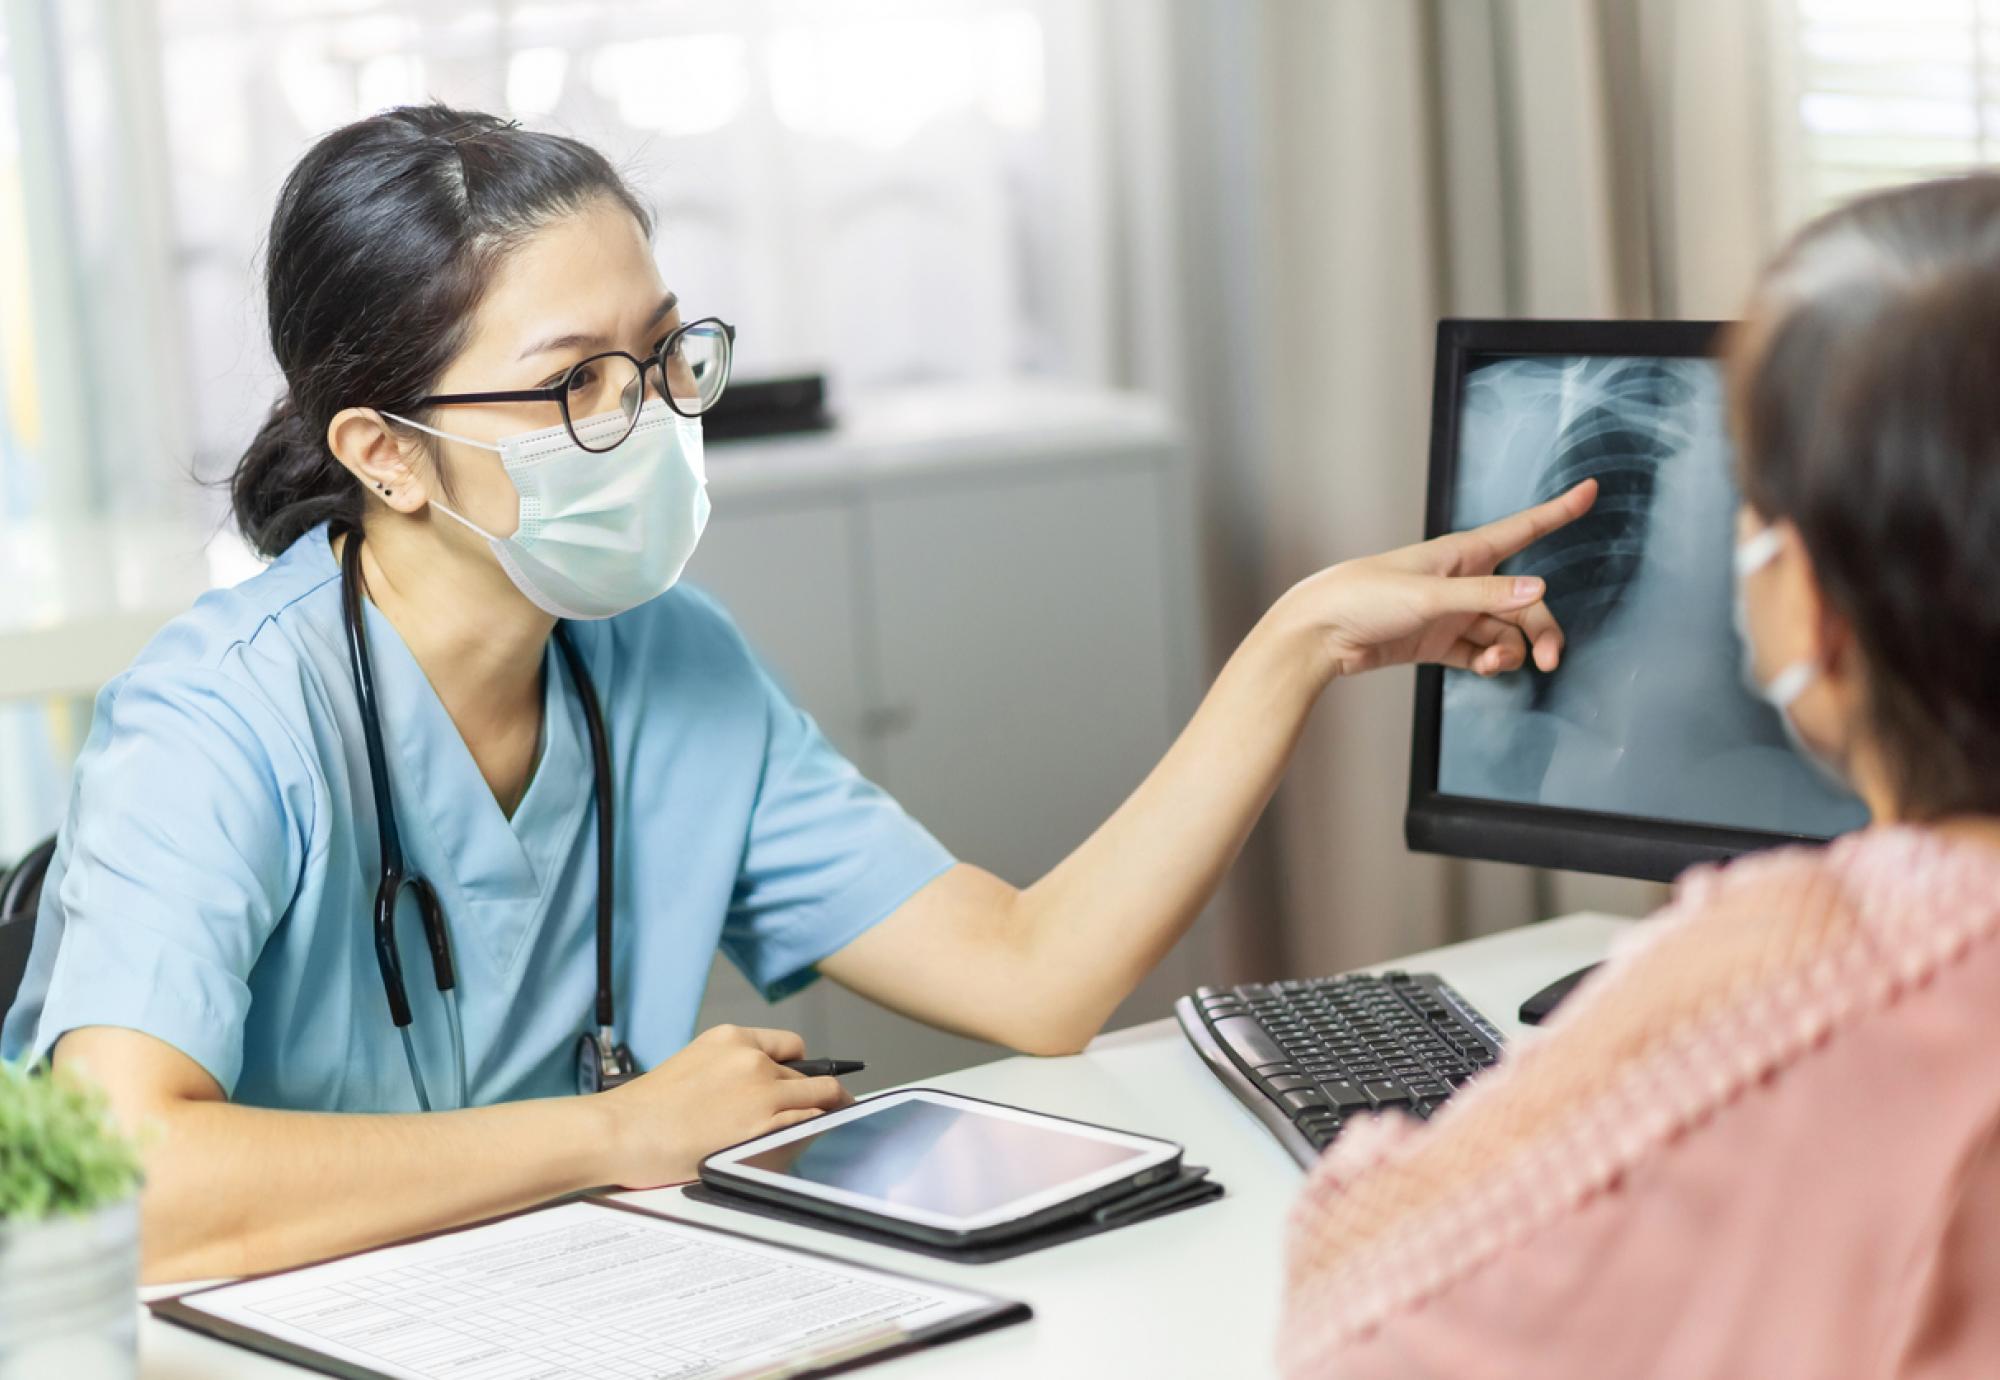 doctor speaking with patient pointing at computer screen